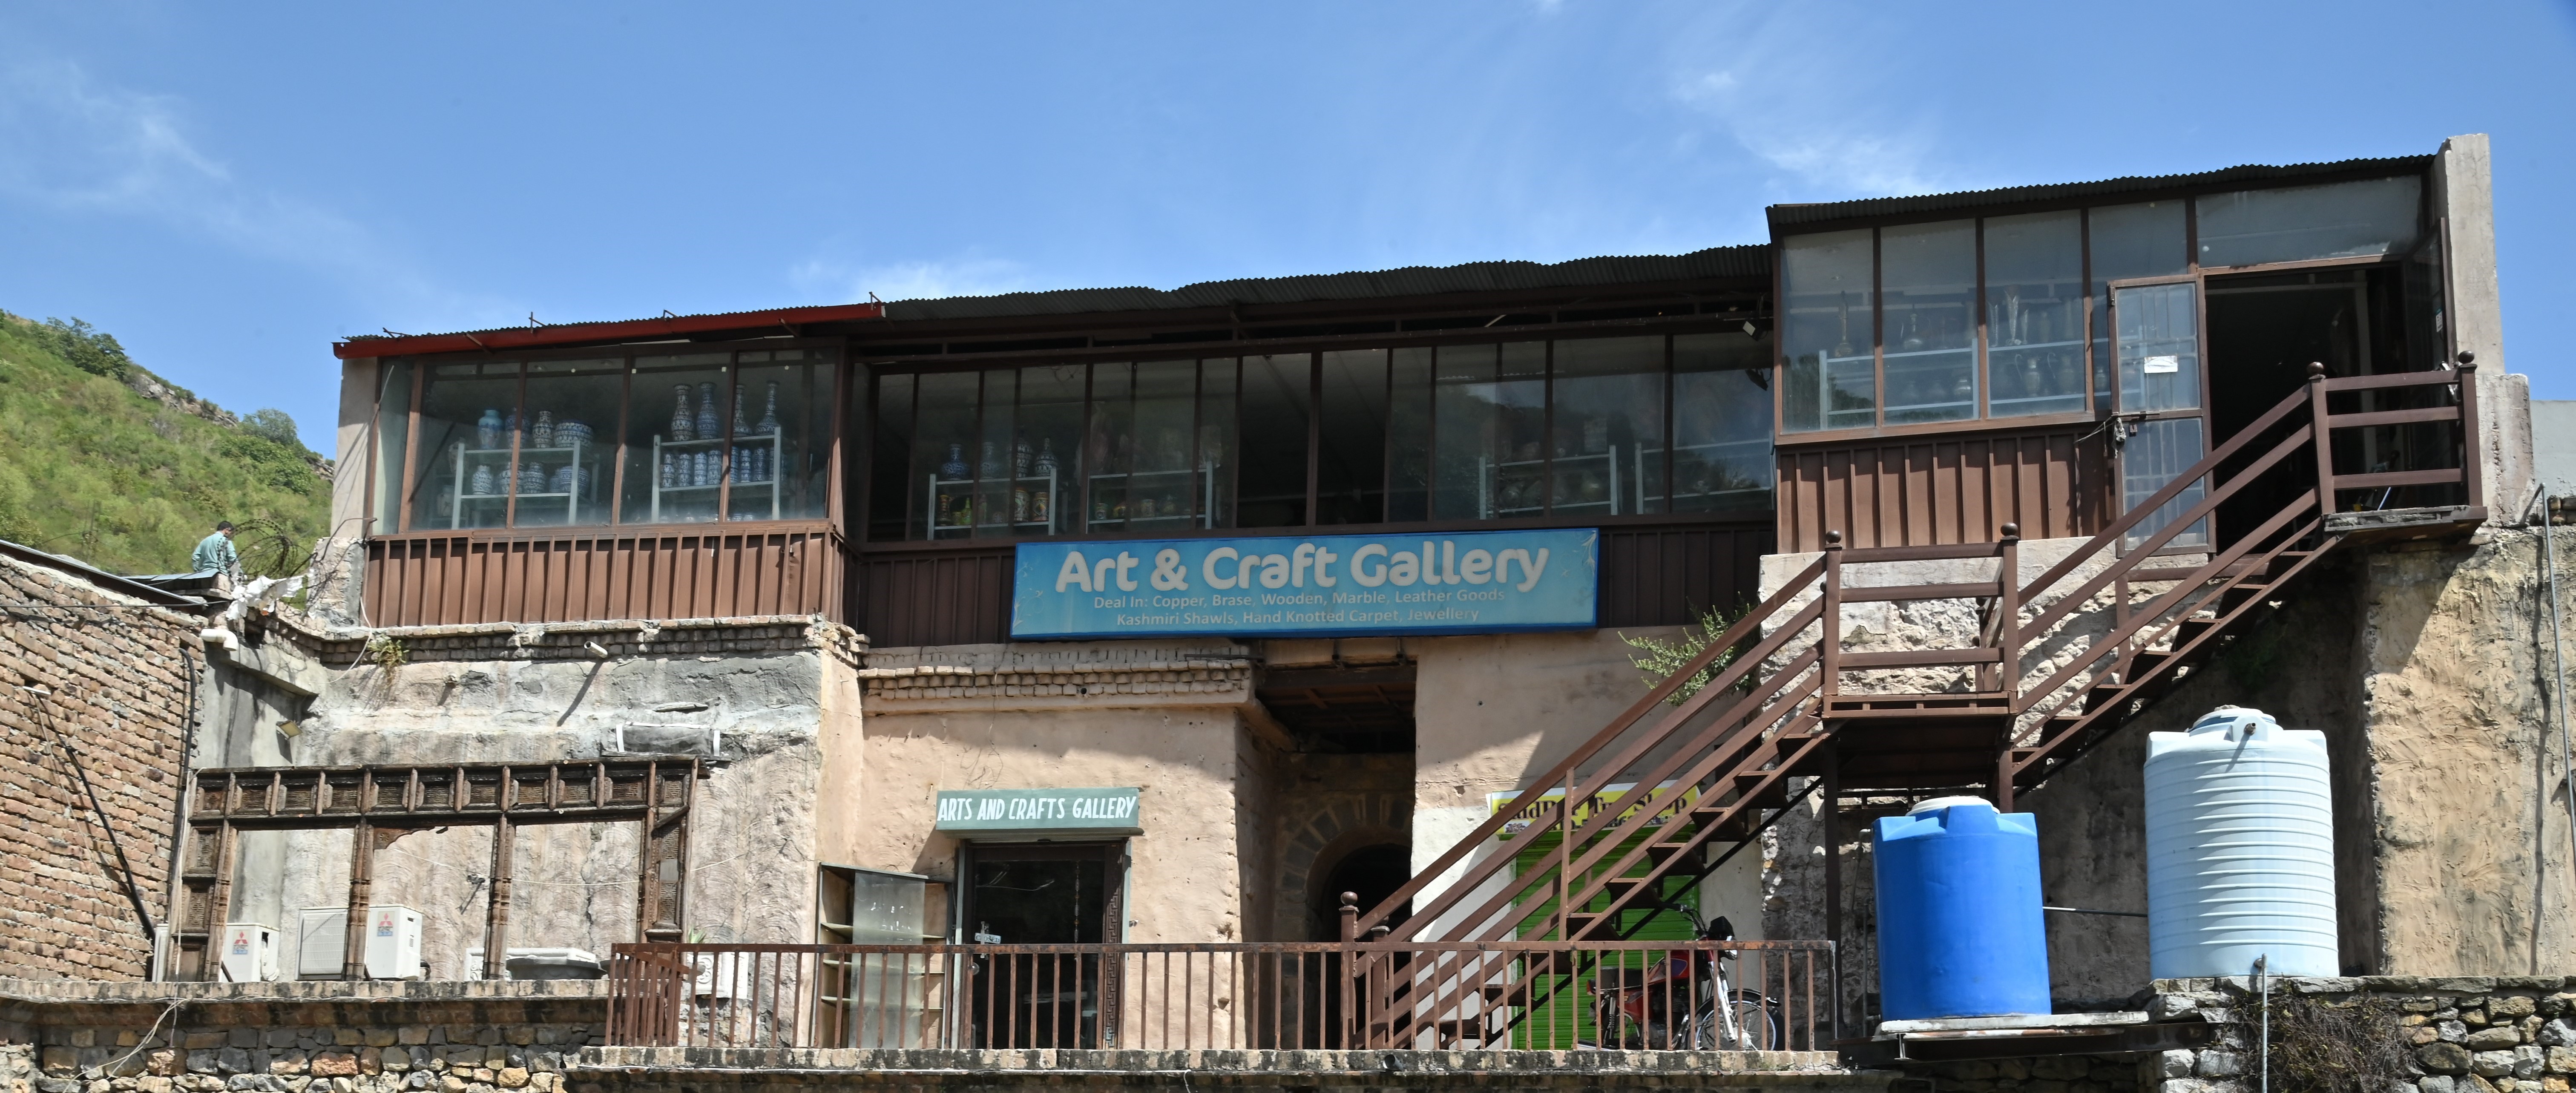 The arts and crafts gallery in Said Pur Village